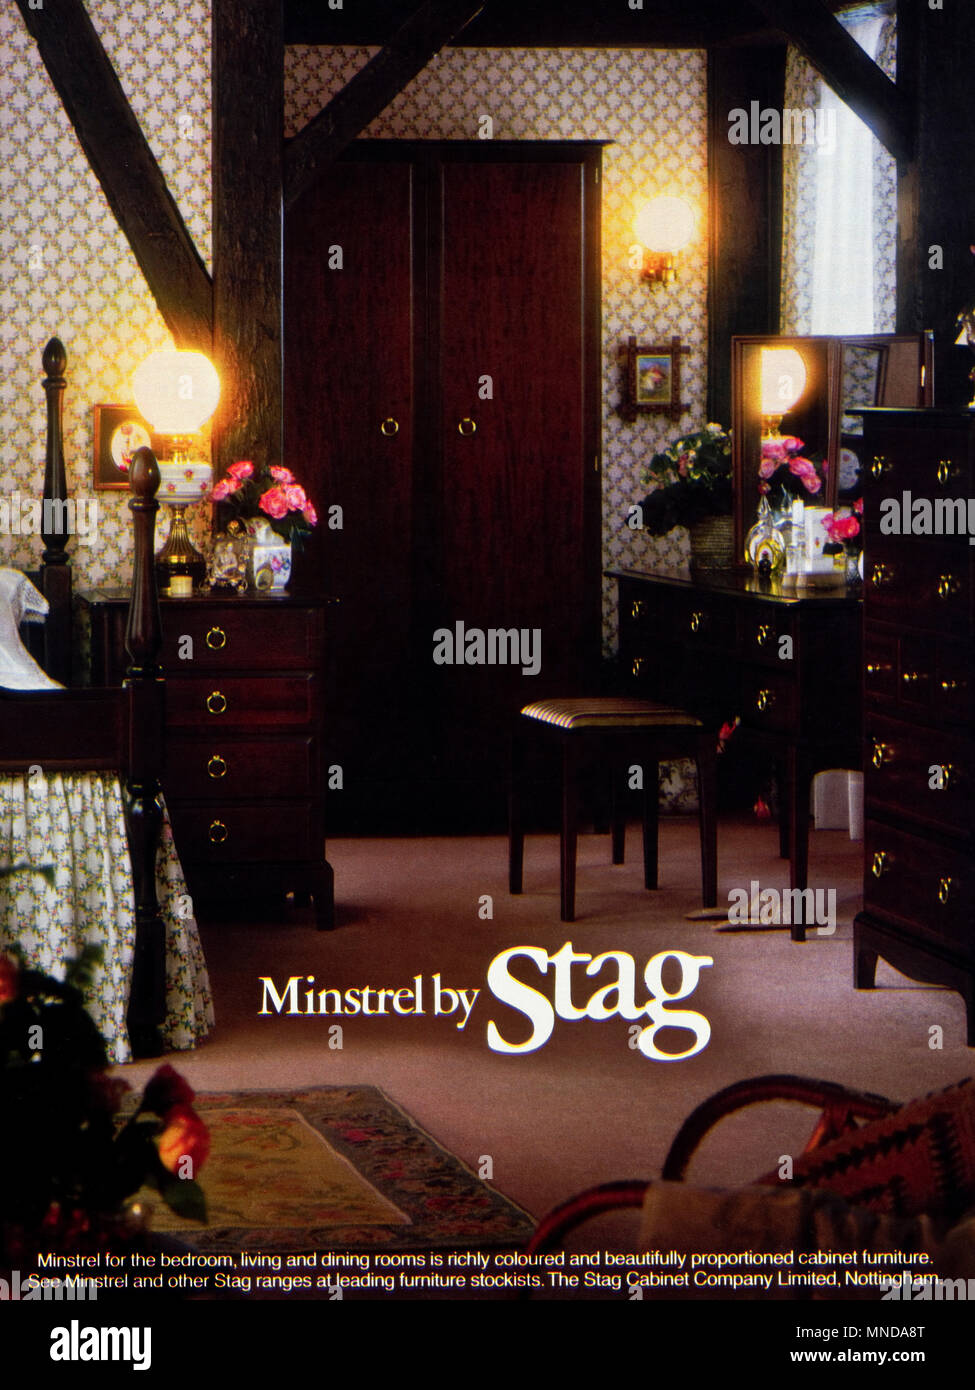 1980s original old vintage advertisement advertising household furniture by The Stag Cabinet Company Limited of Nottingham advert in English magazine circa 1980 Stock Photo